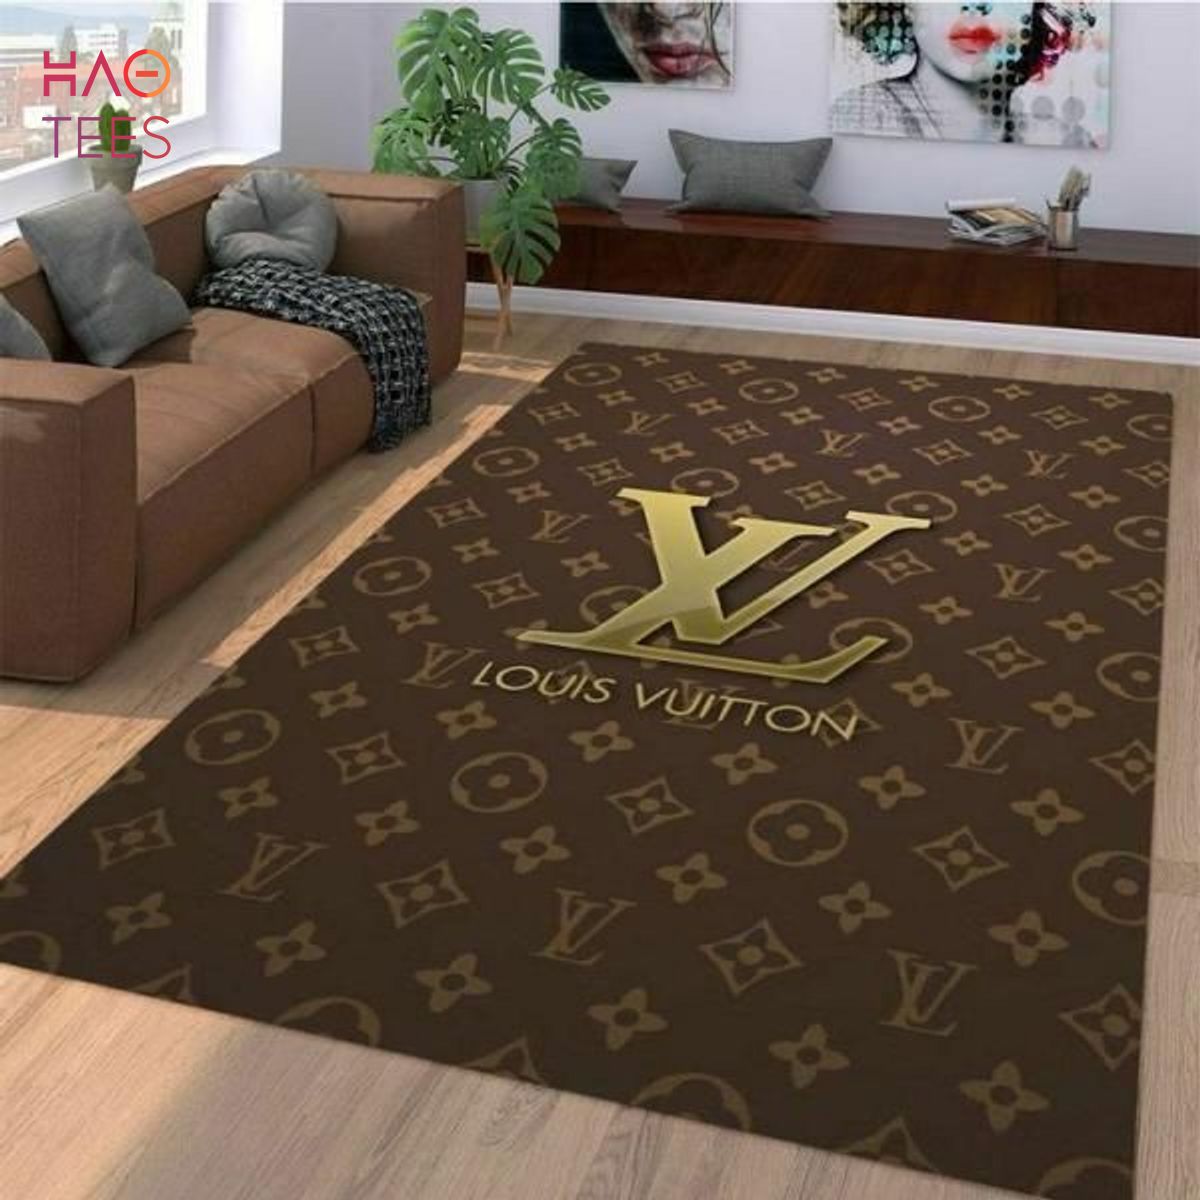 louis vuitton logo brown and gold